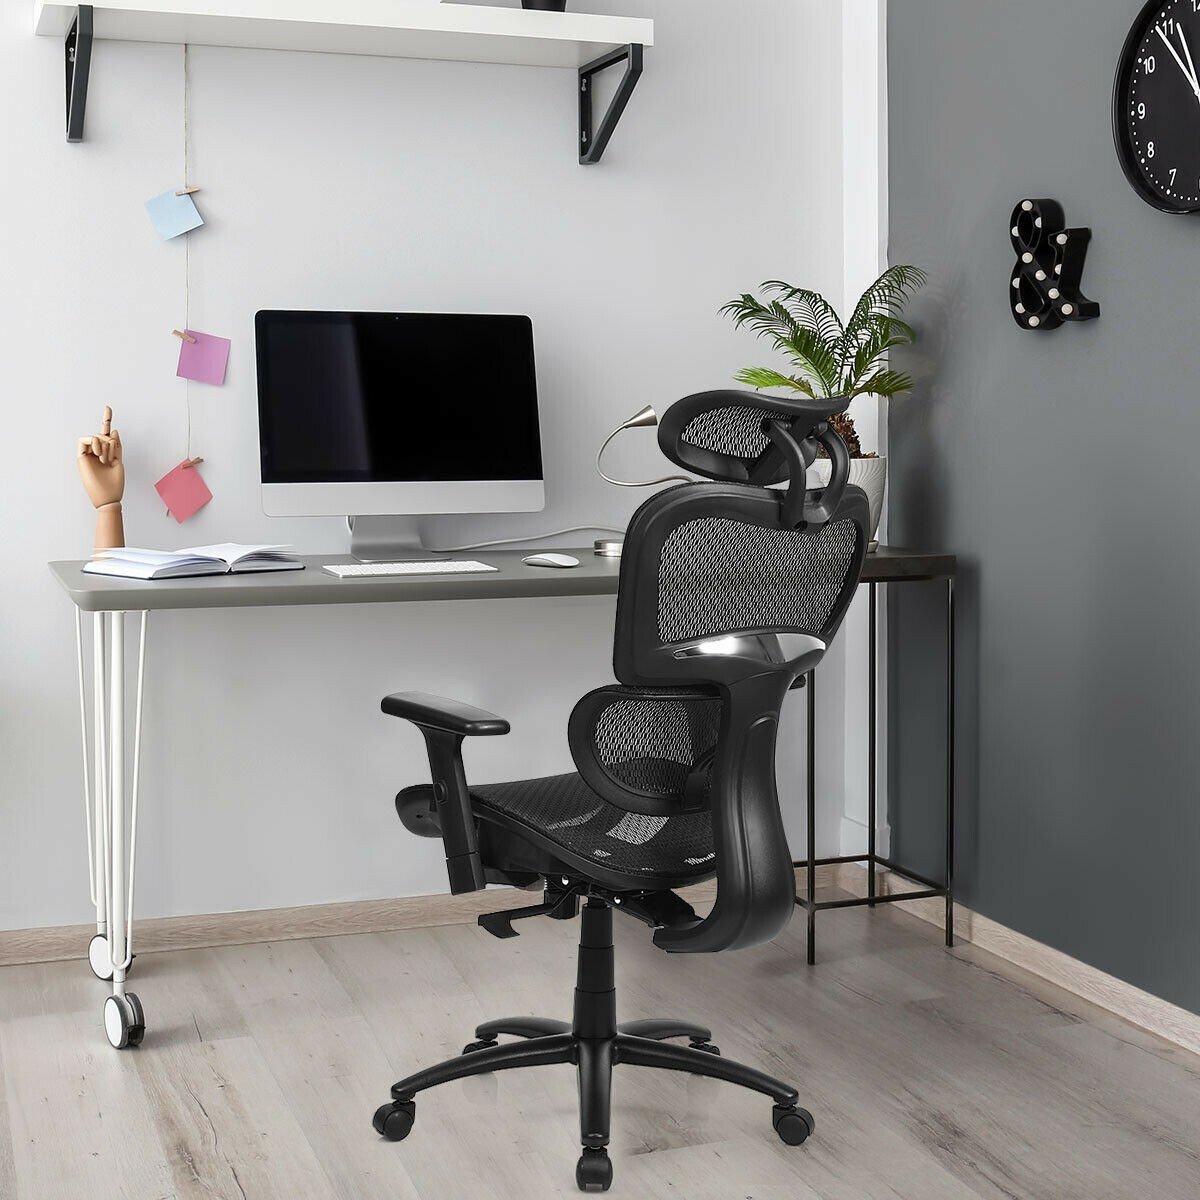 Ergonomic Office Chair, Reclining Office Chair Desk Chair with